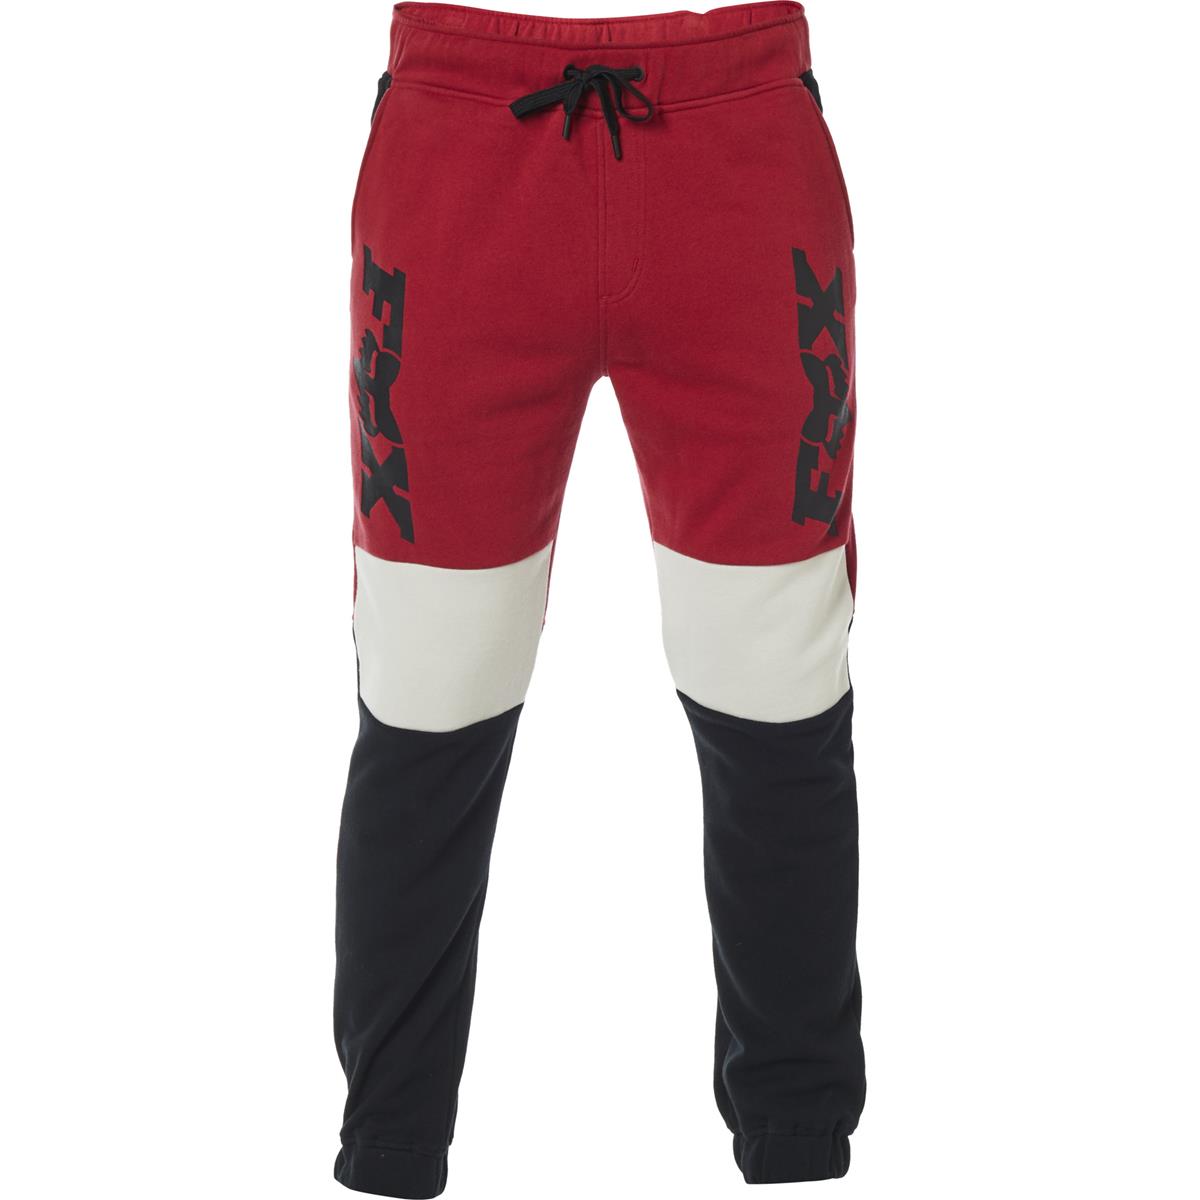 Fox Sweat Pant Lateral Moto Black/Red